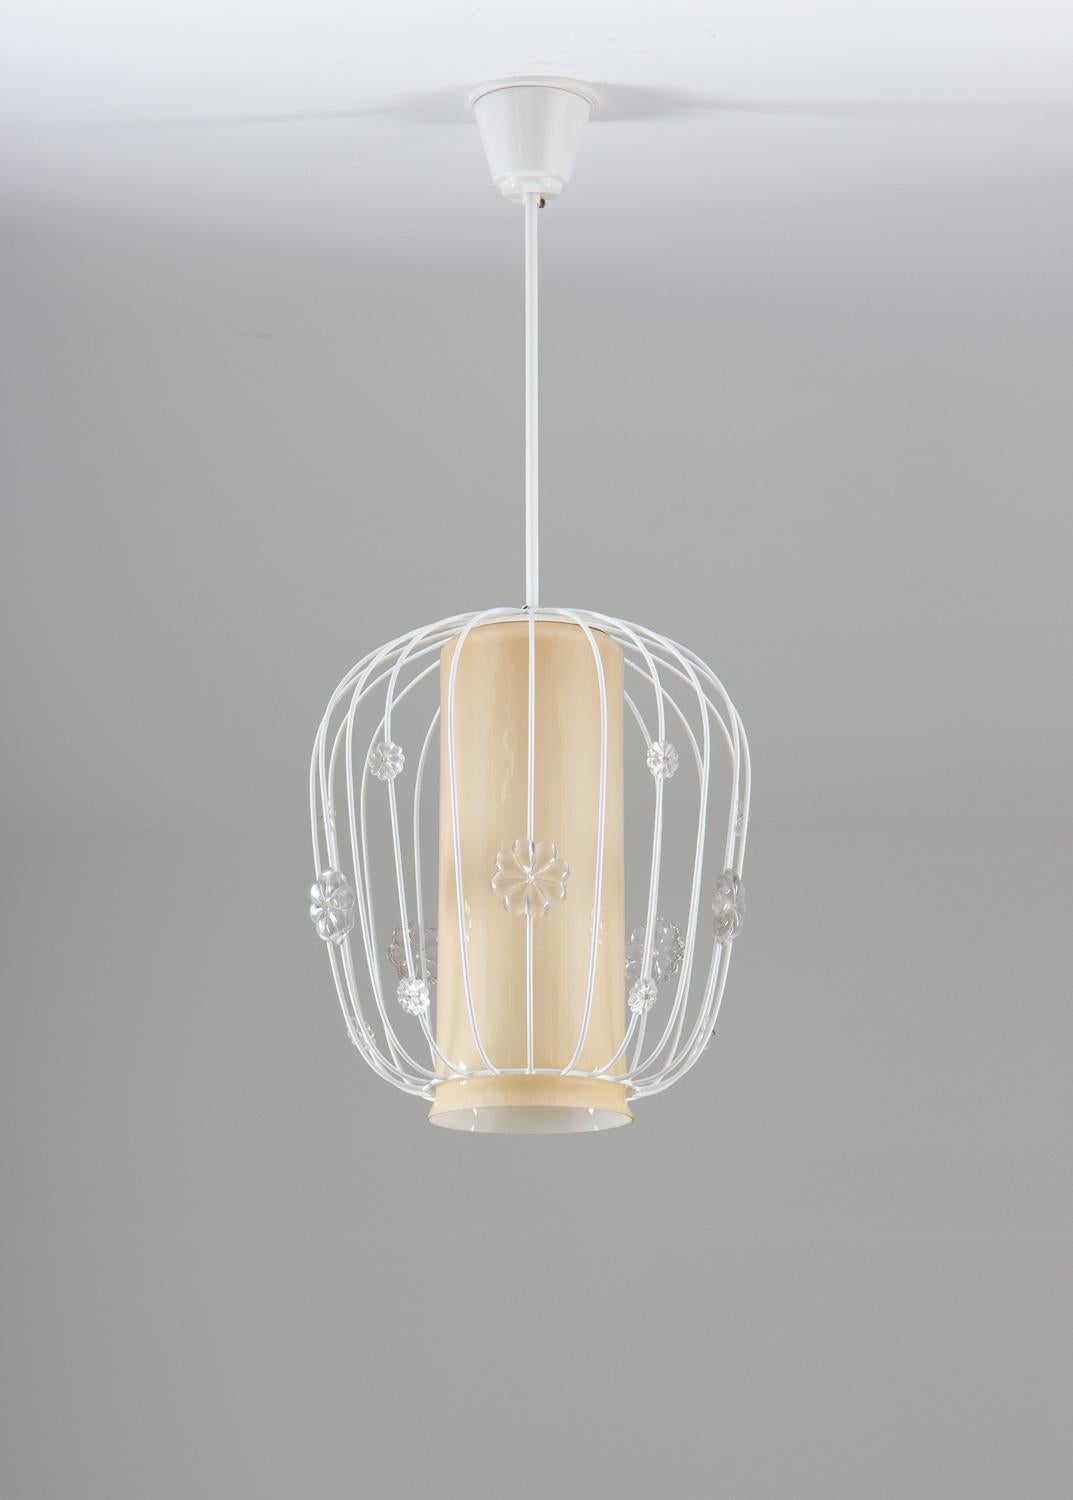 Rare and elegant pendant in metal and glass, produced by Böhlmarks, Sweden.

The lamp features one light source behind the opaline glass shade, giving a beautiful and soft light. The shade is surrounded by a metal shade, decorated with clear glass